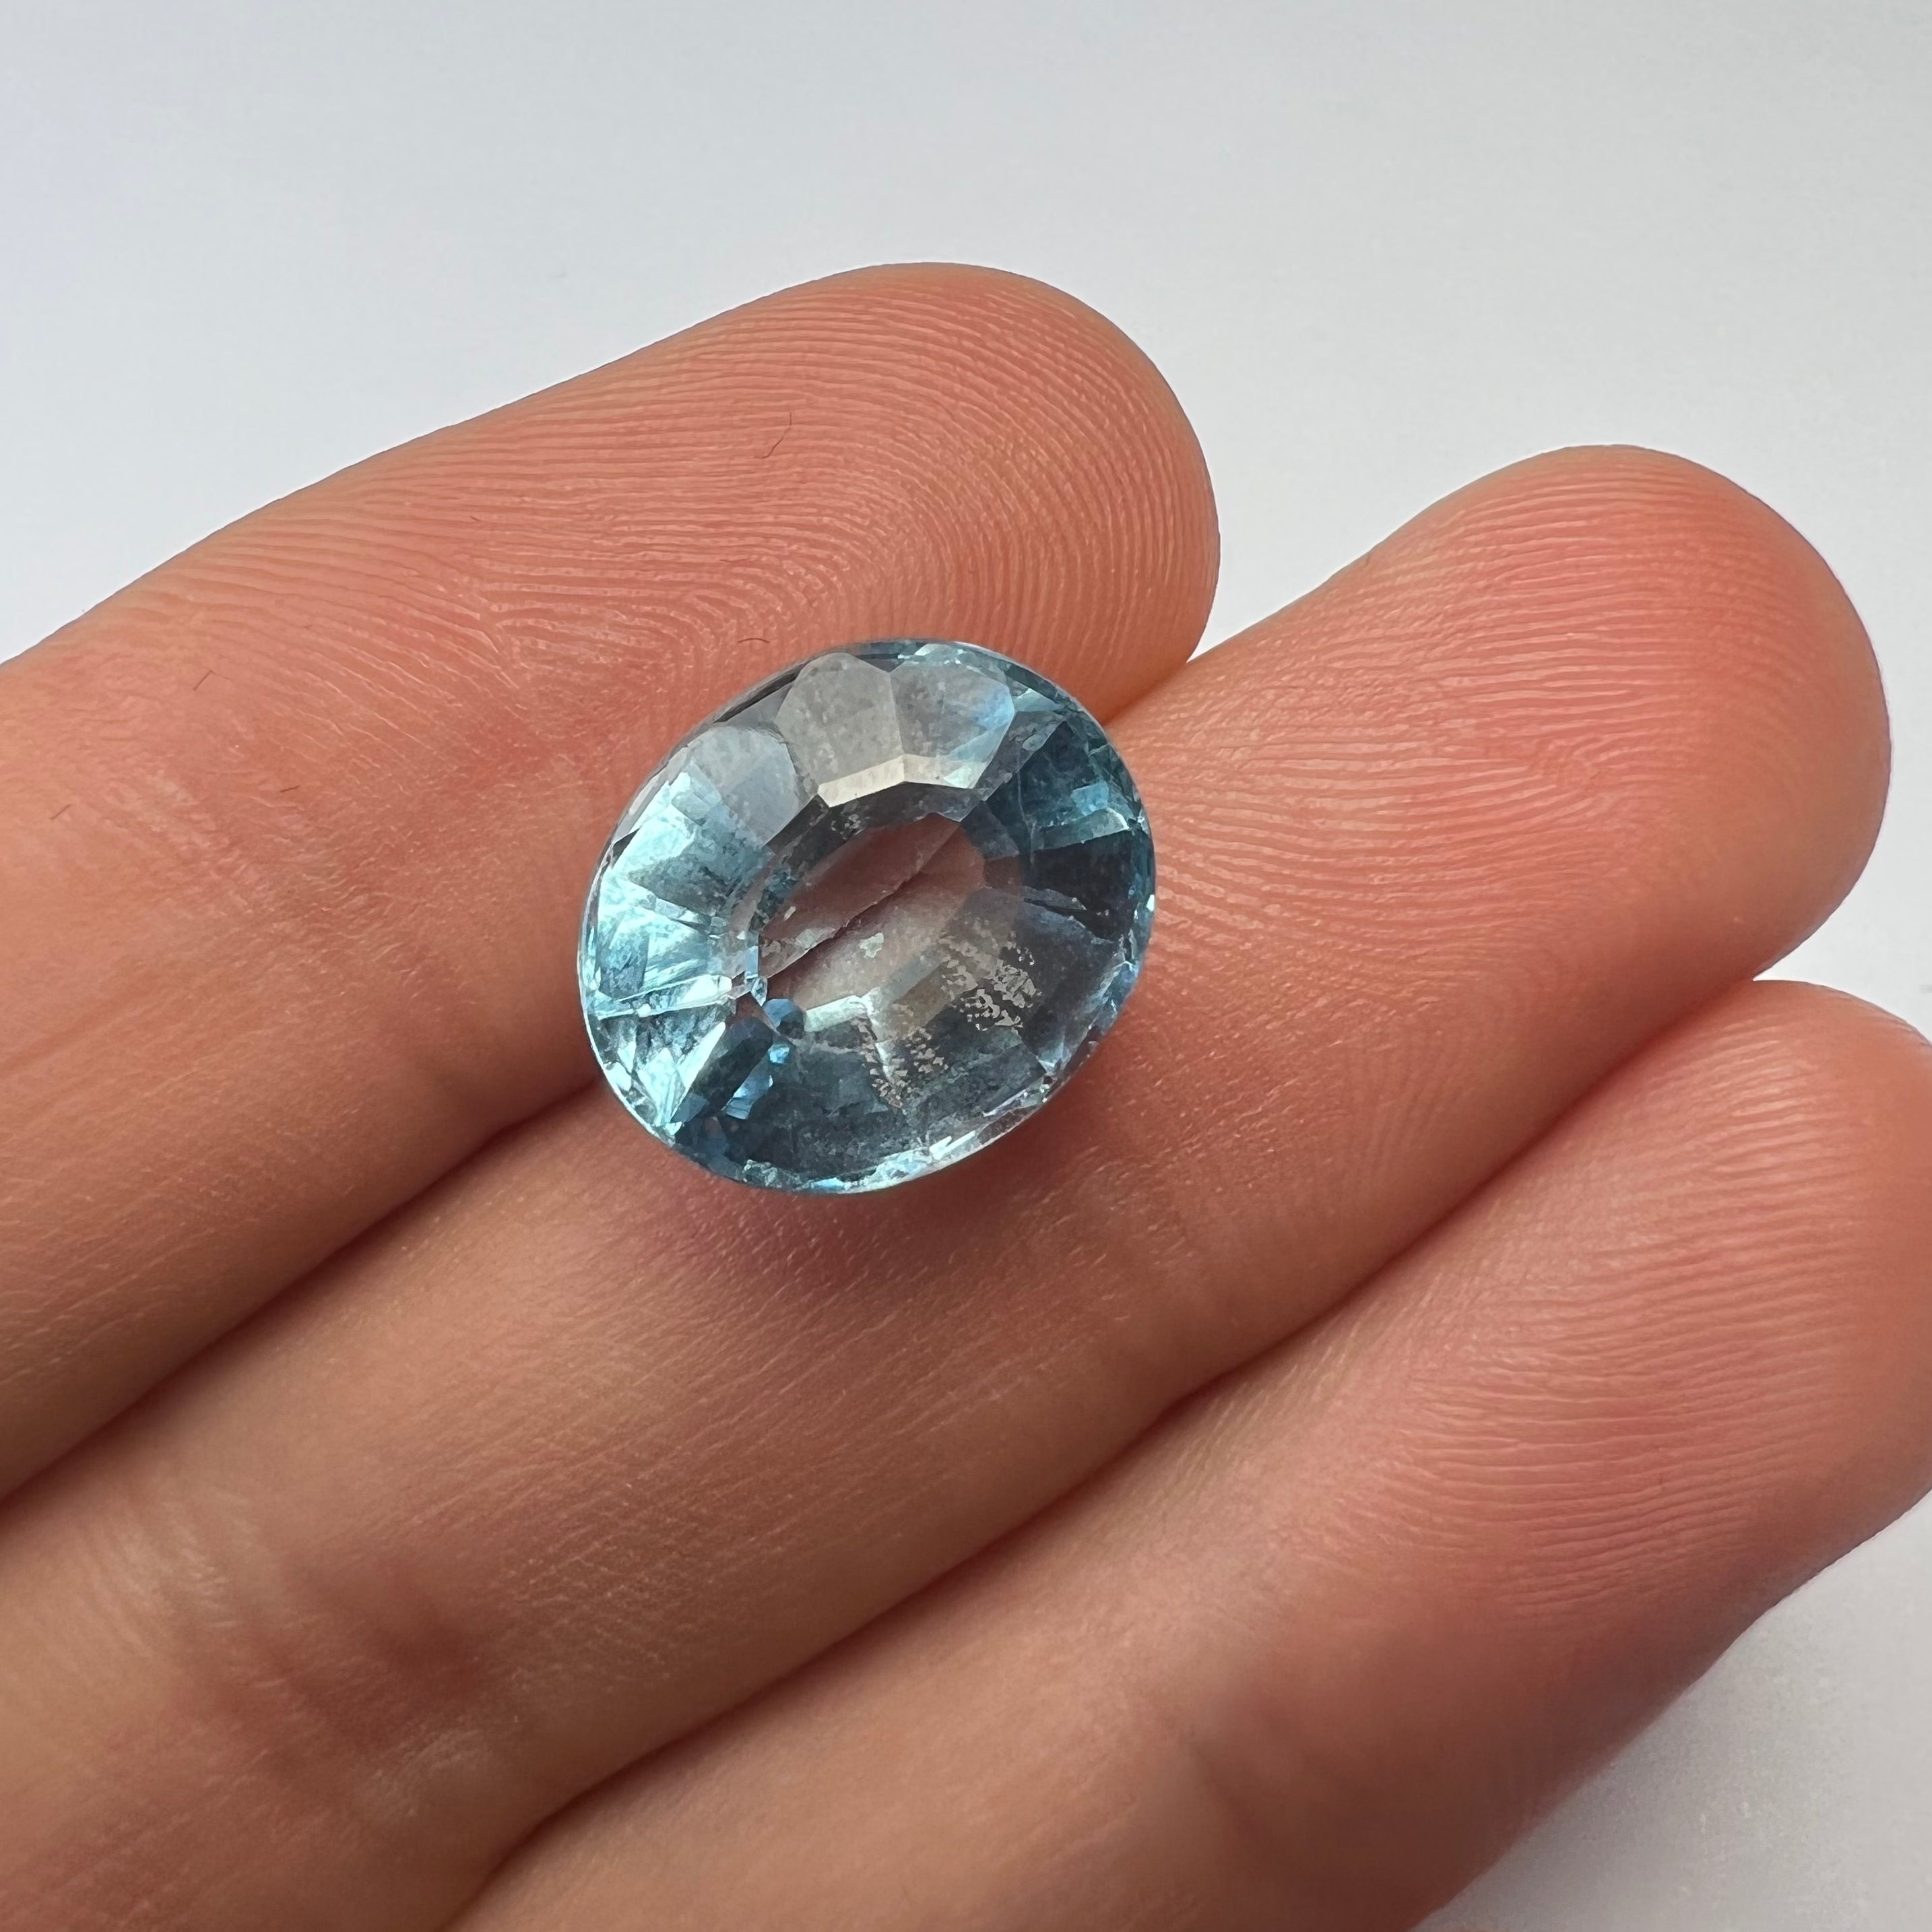 9.31CTW Loose Natural Oval Cut Topaz 13.1x11x7.9mm Earth mined Gemstone